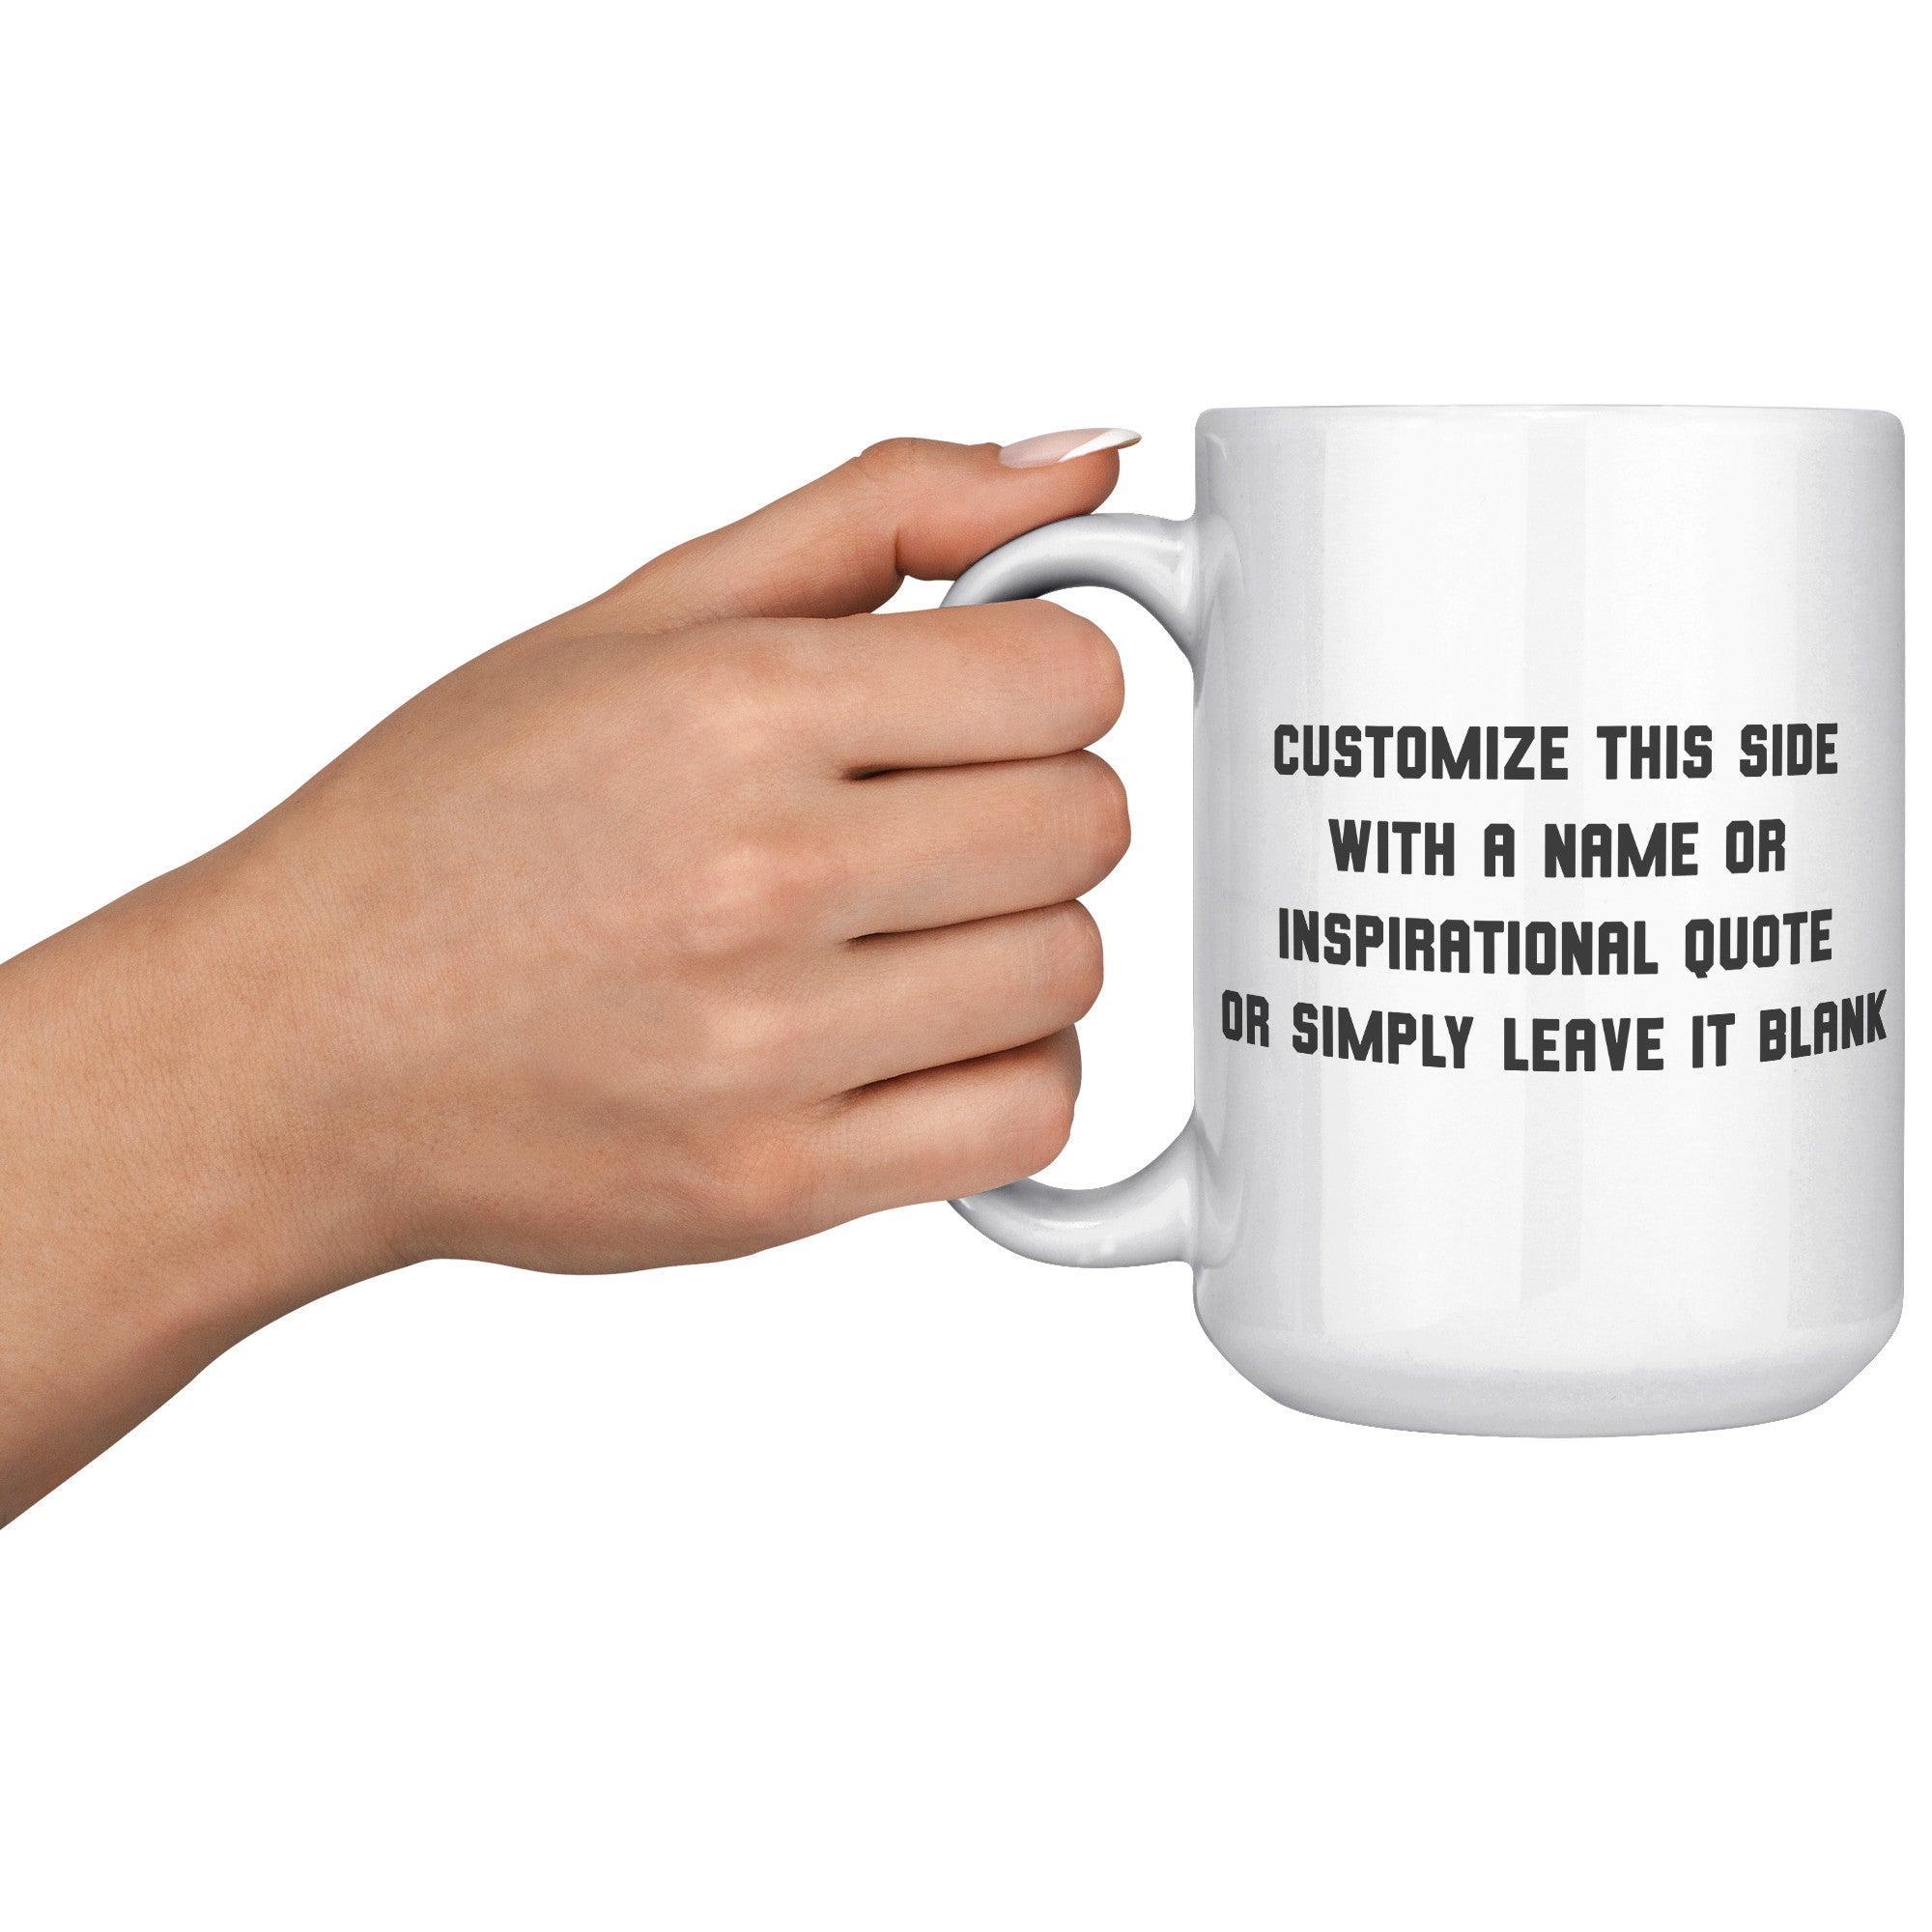 "Female Runner Coffee Mug - Inspirational Running Quotes Cup - Perfect Gift for Women Runners - Motivational Marathoner's Morning Brew" - F1